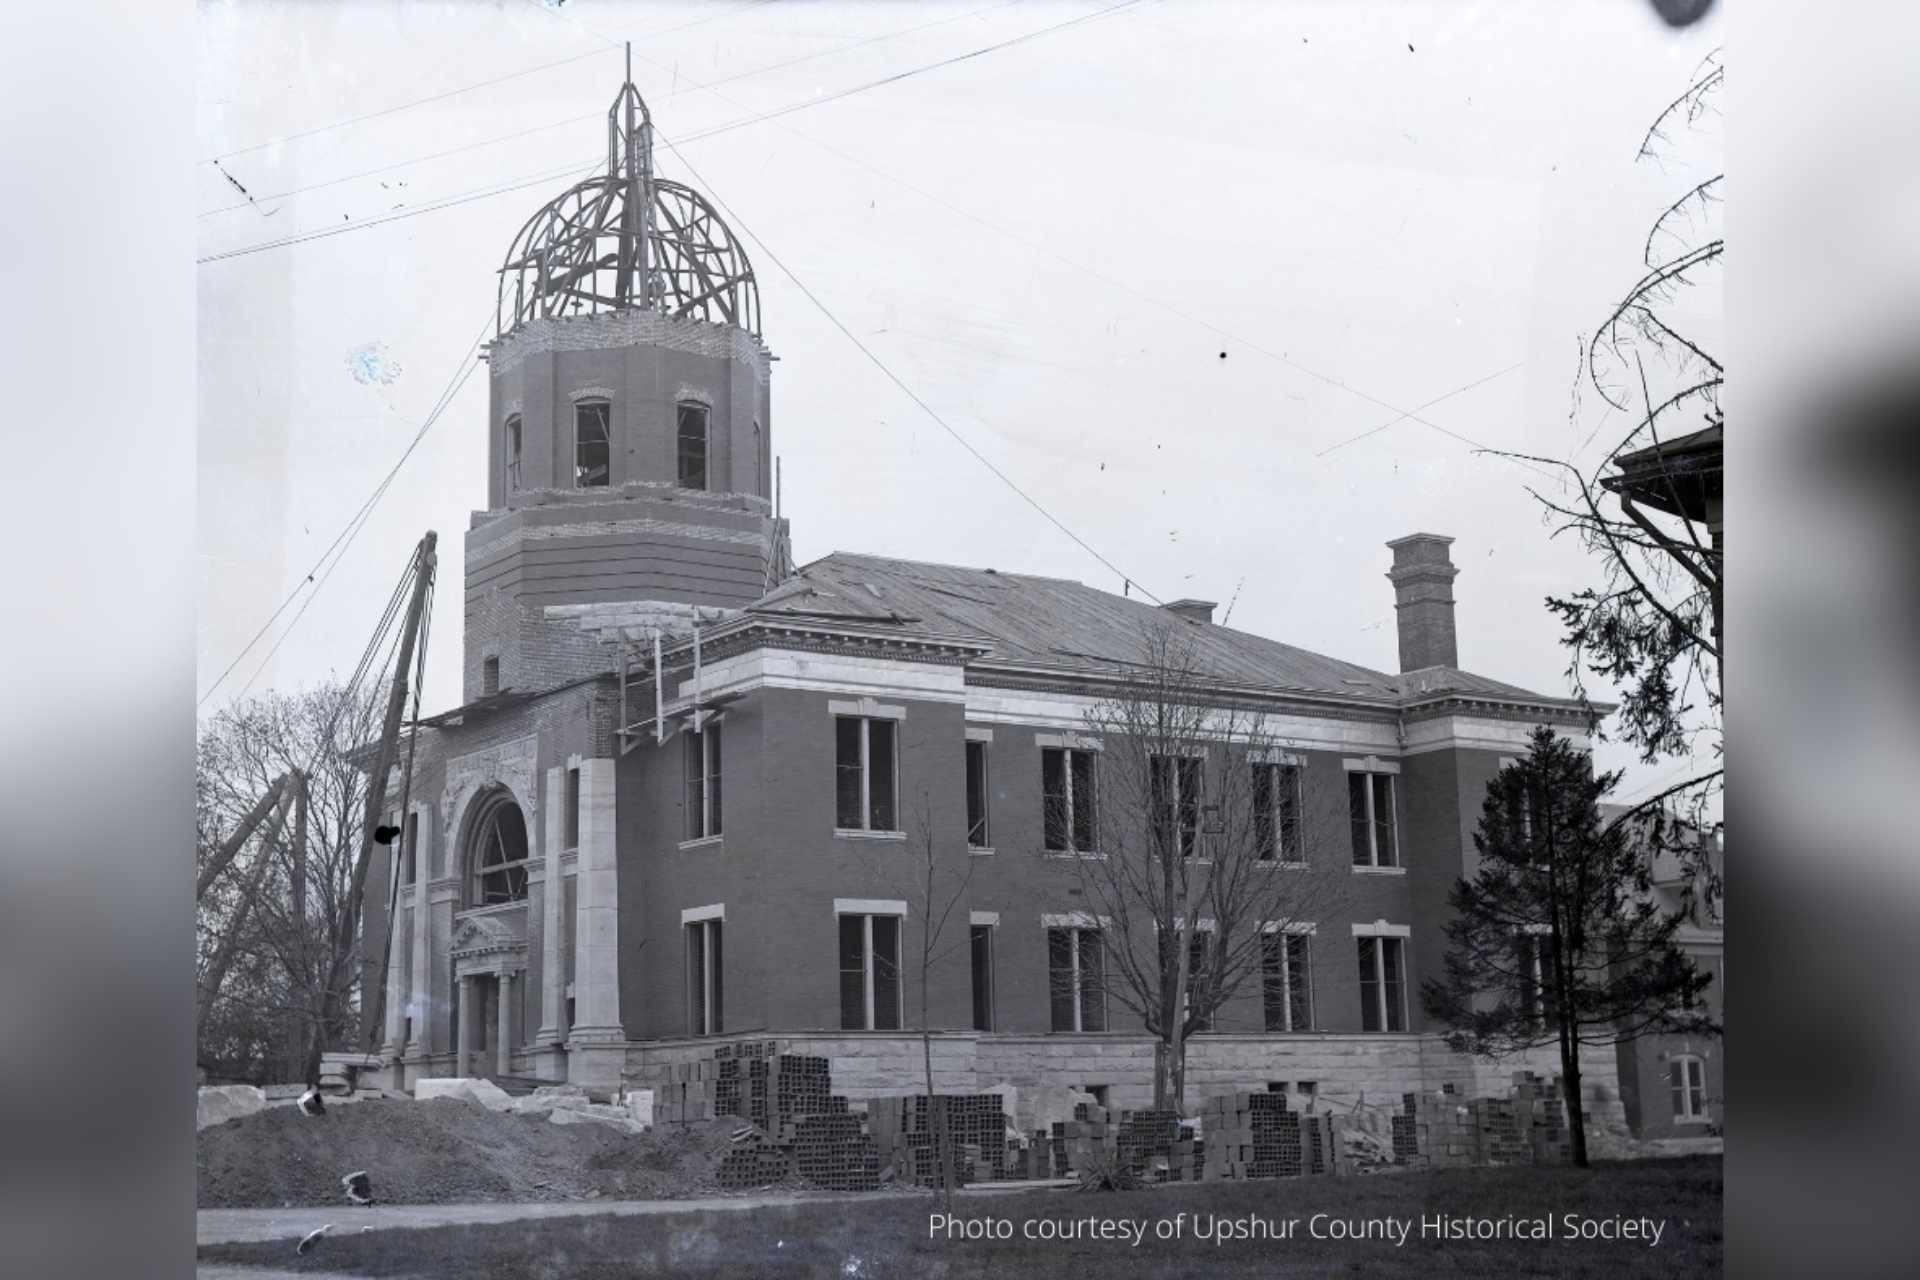 Upshur County Courthouse during construction in 1899-1900